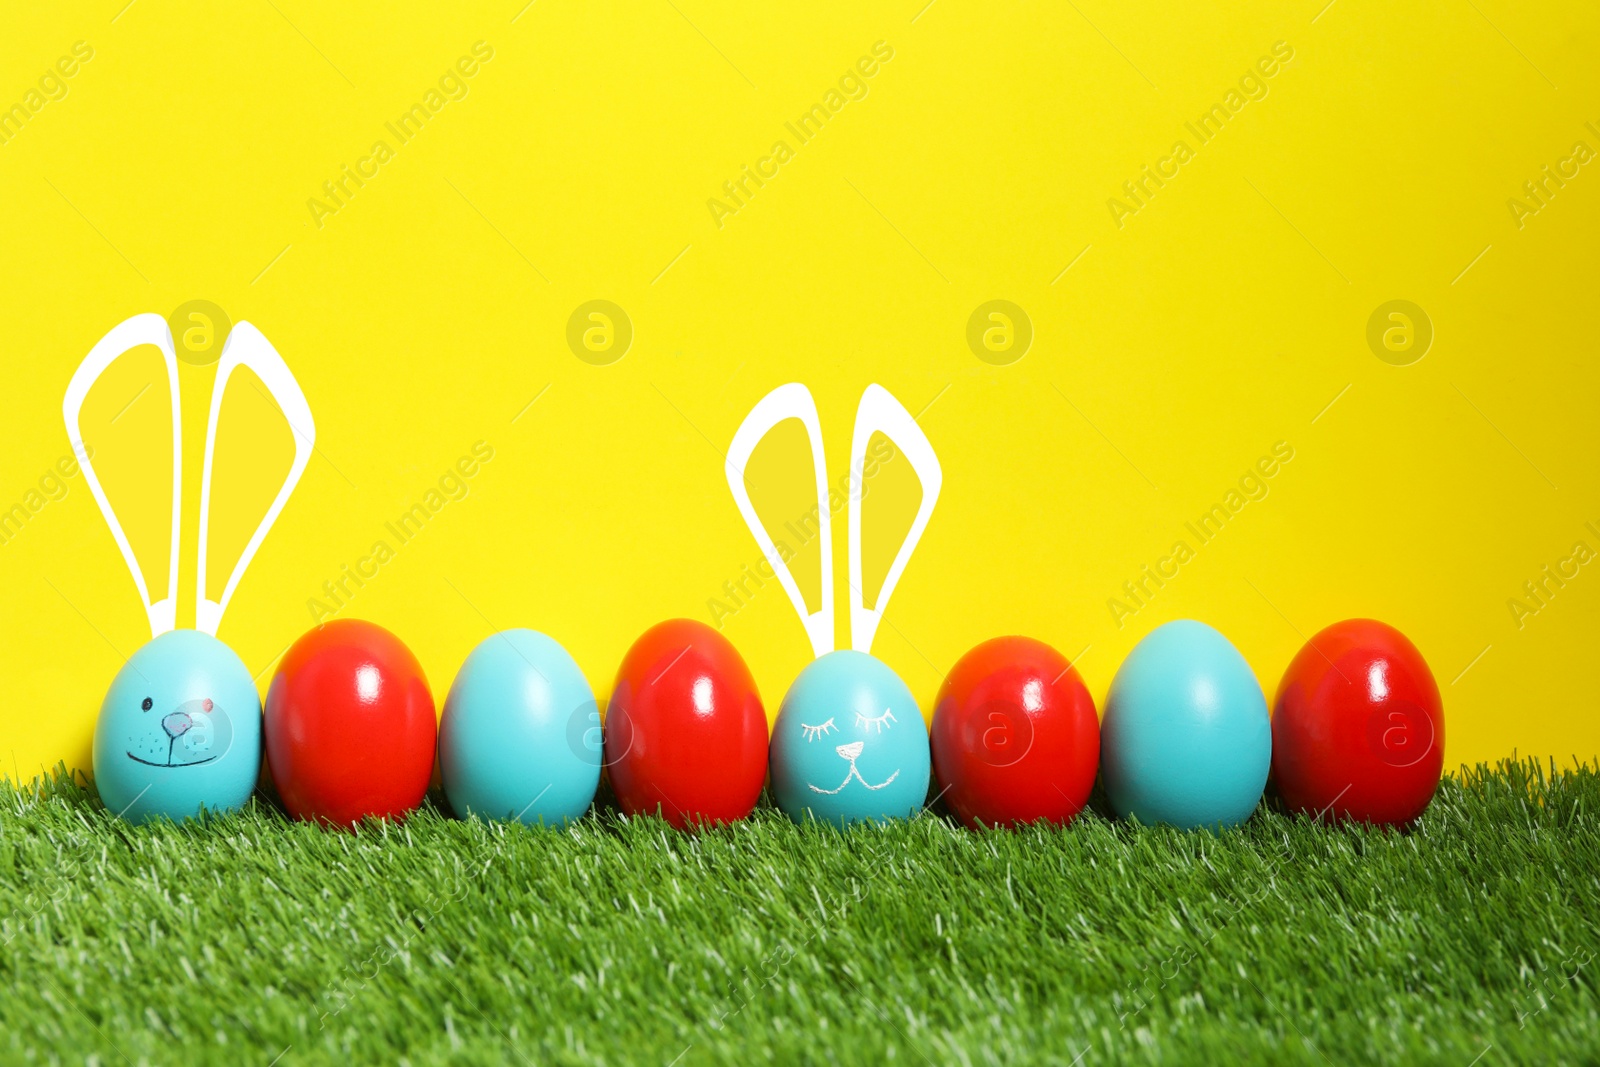 Image of Two eggs with drawn faces and ears as Easter bunnies among others on green grass against yellow background